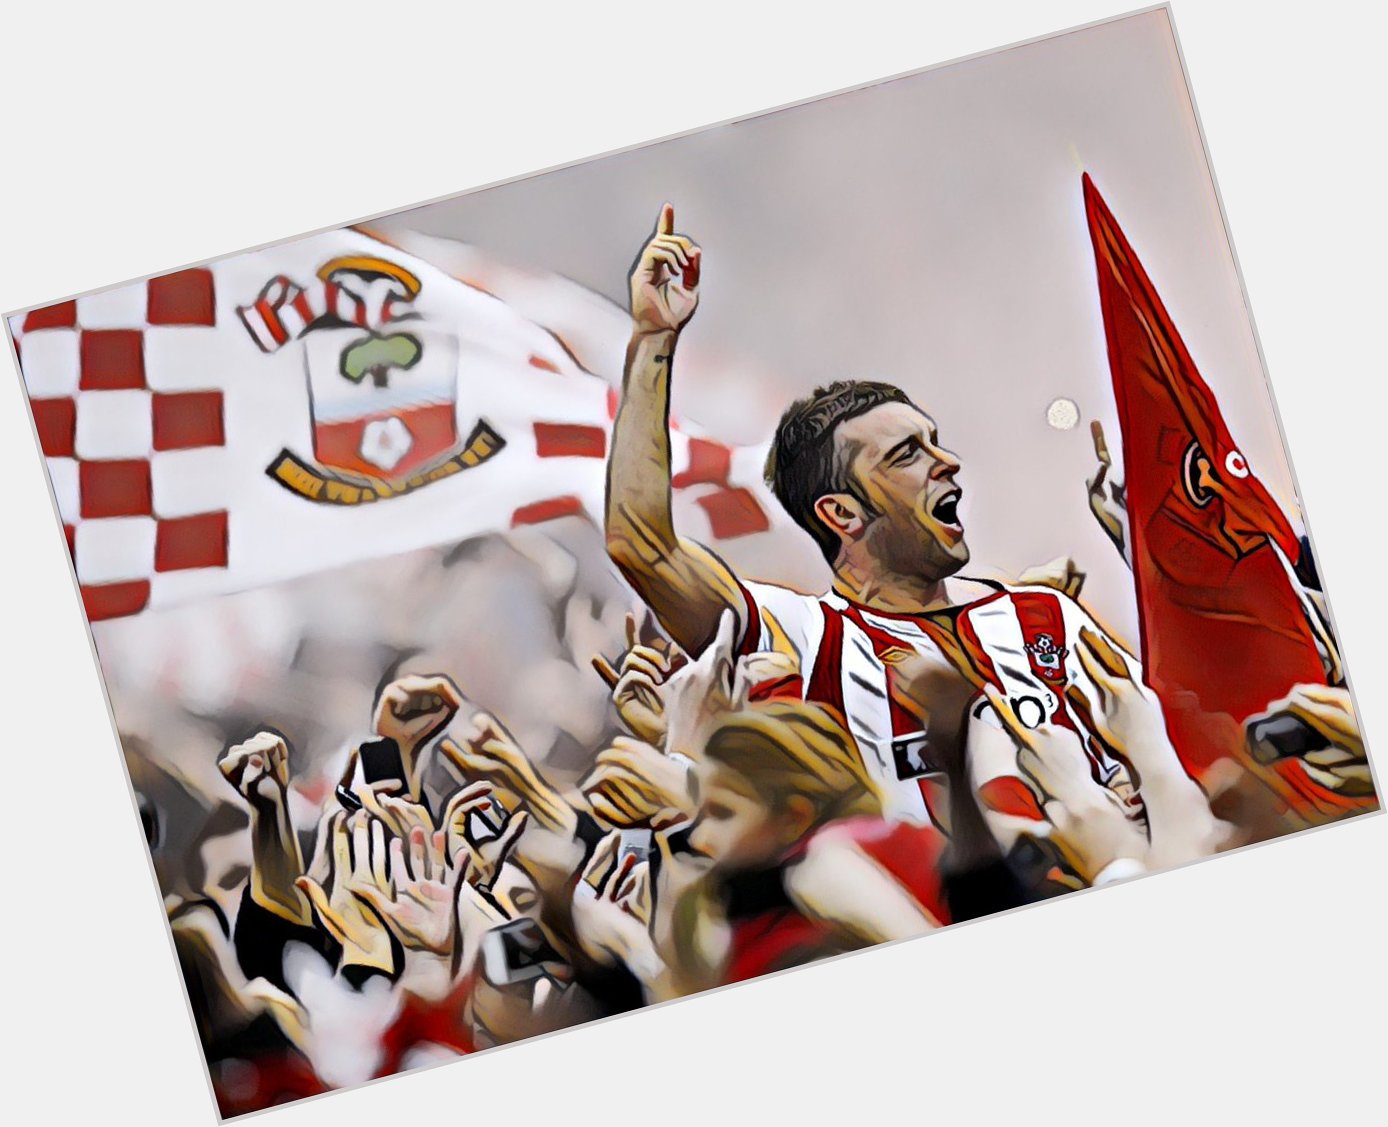 Happy Birthday Rickie Lambert. Thanks for all you did for us. Hope you\re enjoying your retirement. 